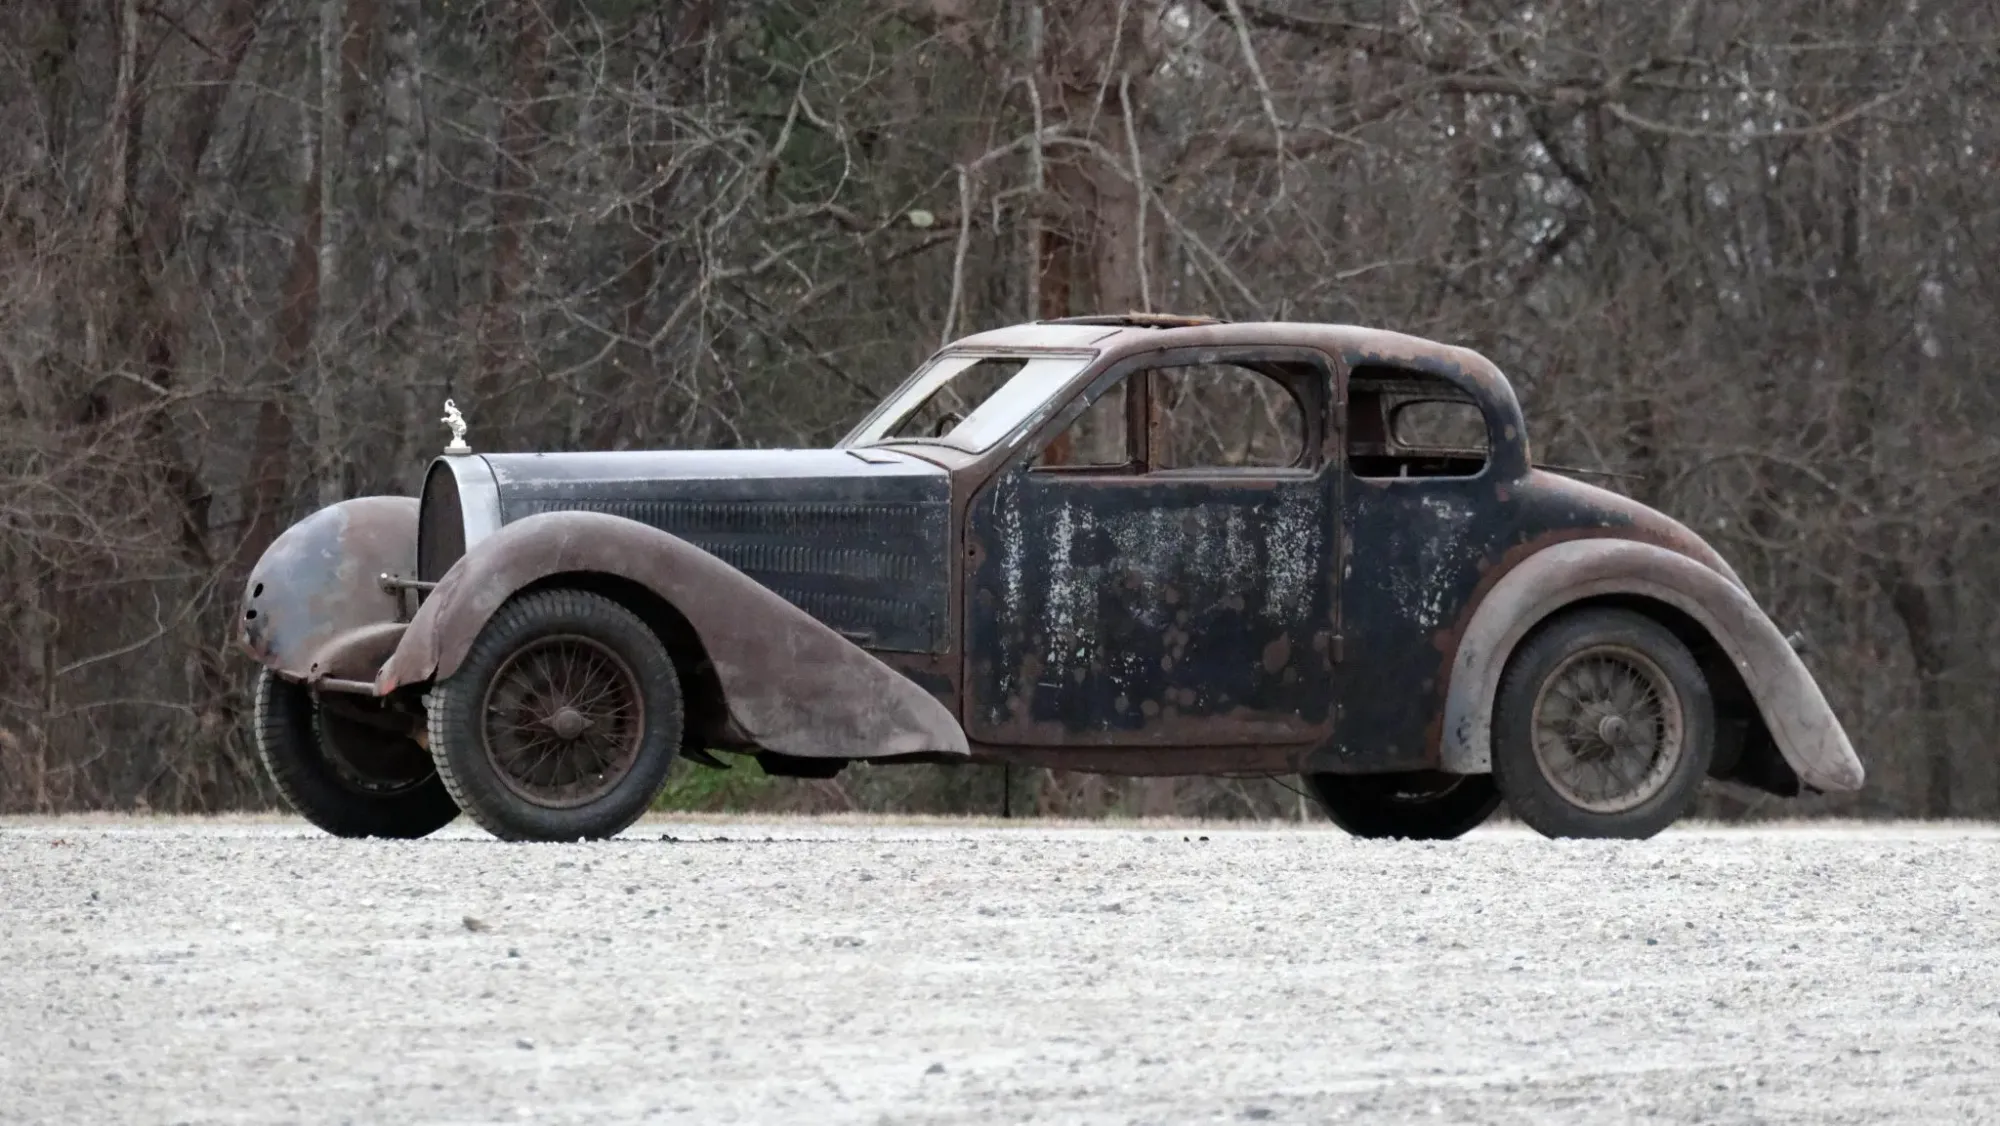 1936 Bugatti Type 57 Ventoux Project Car Once Chauffeured a Baby Elephant